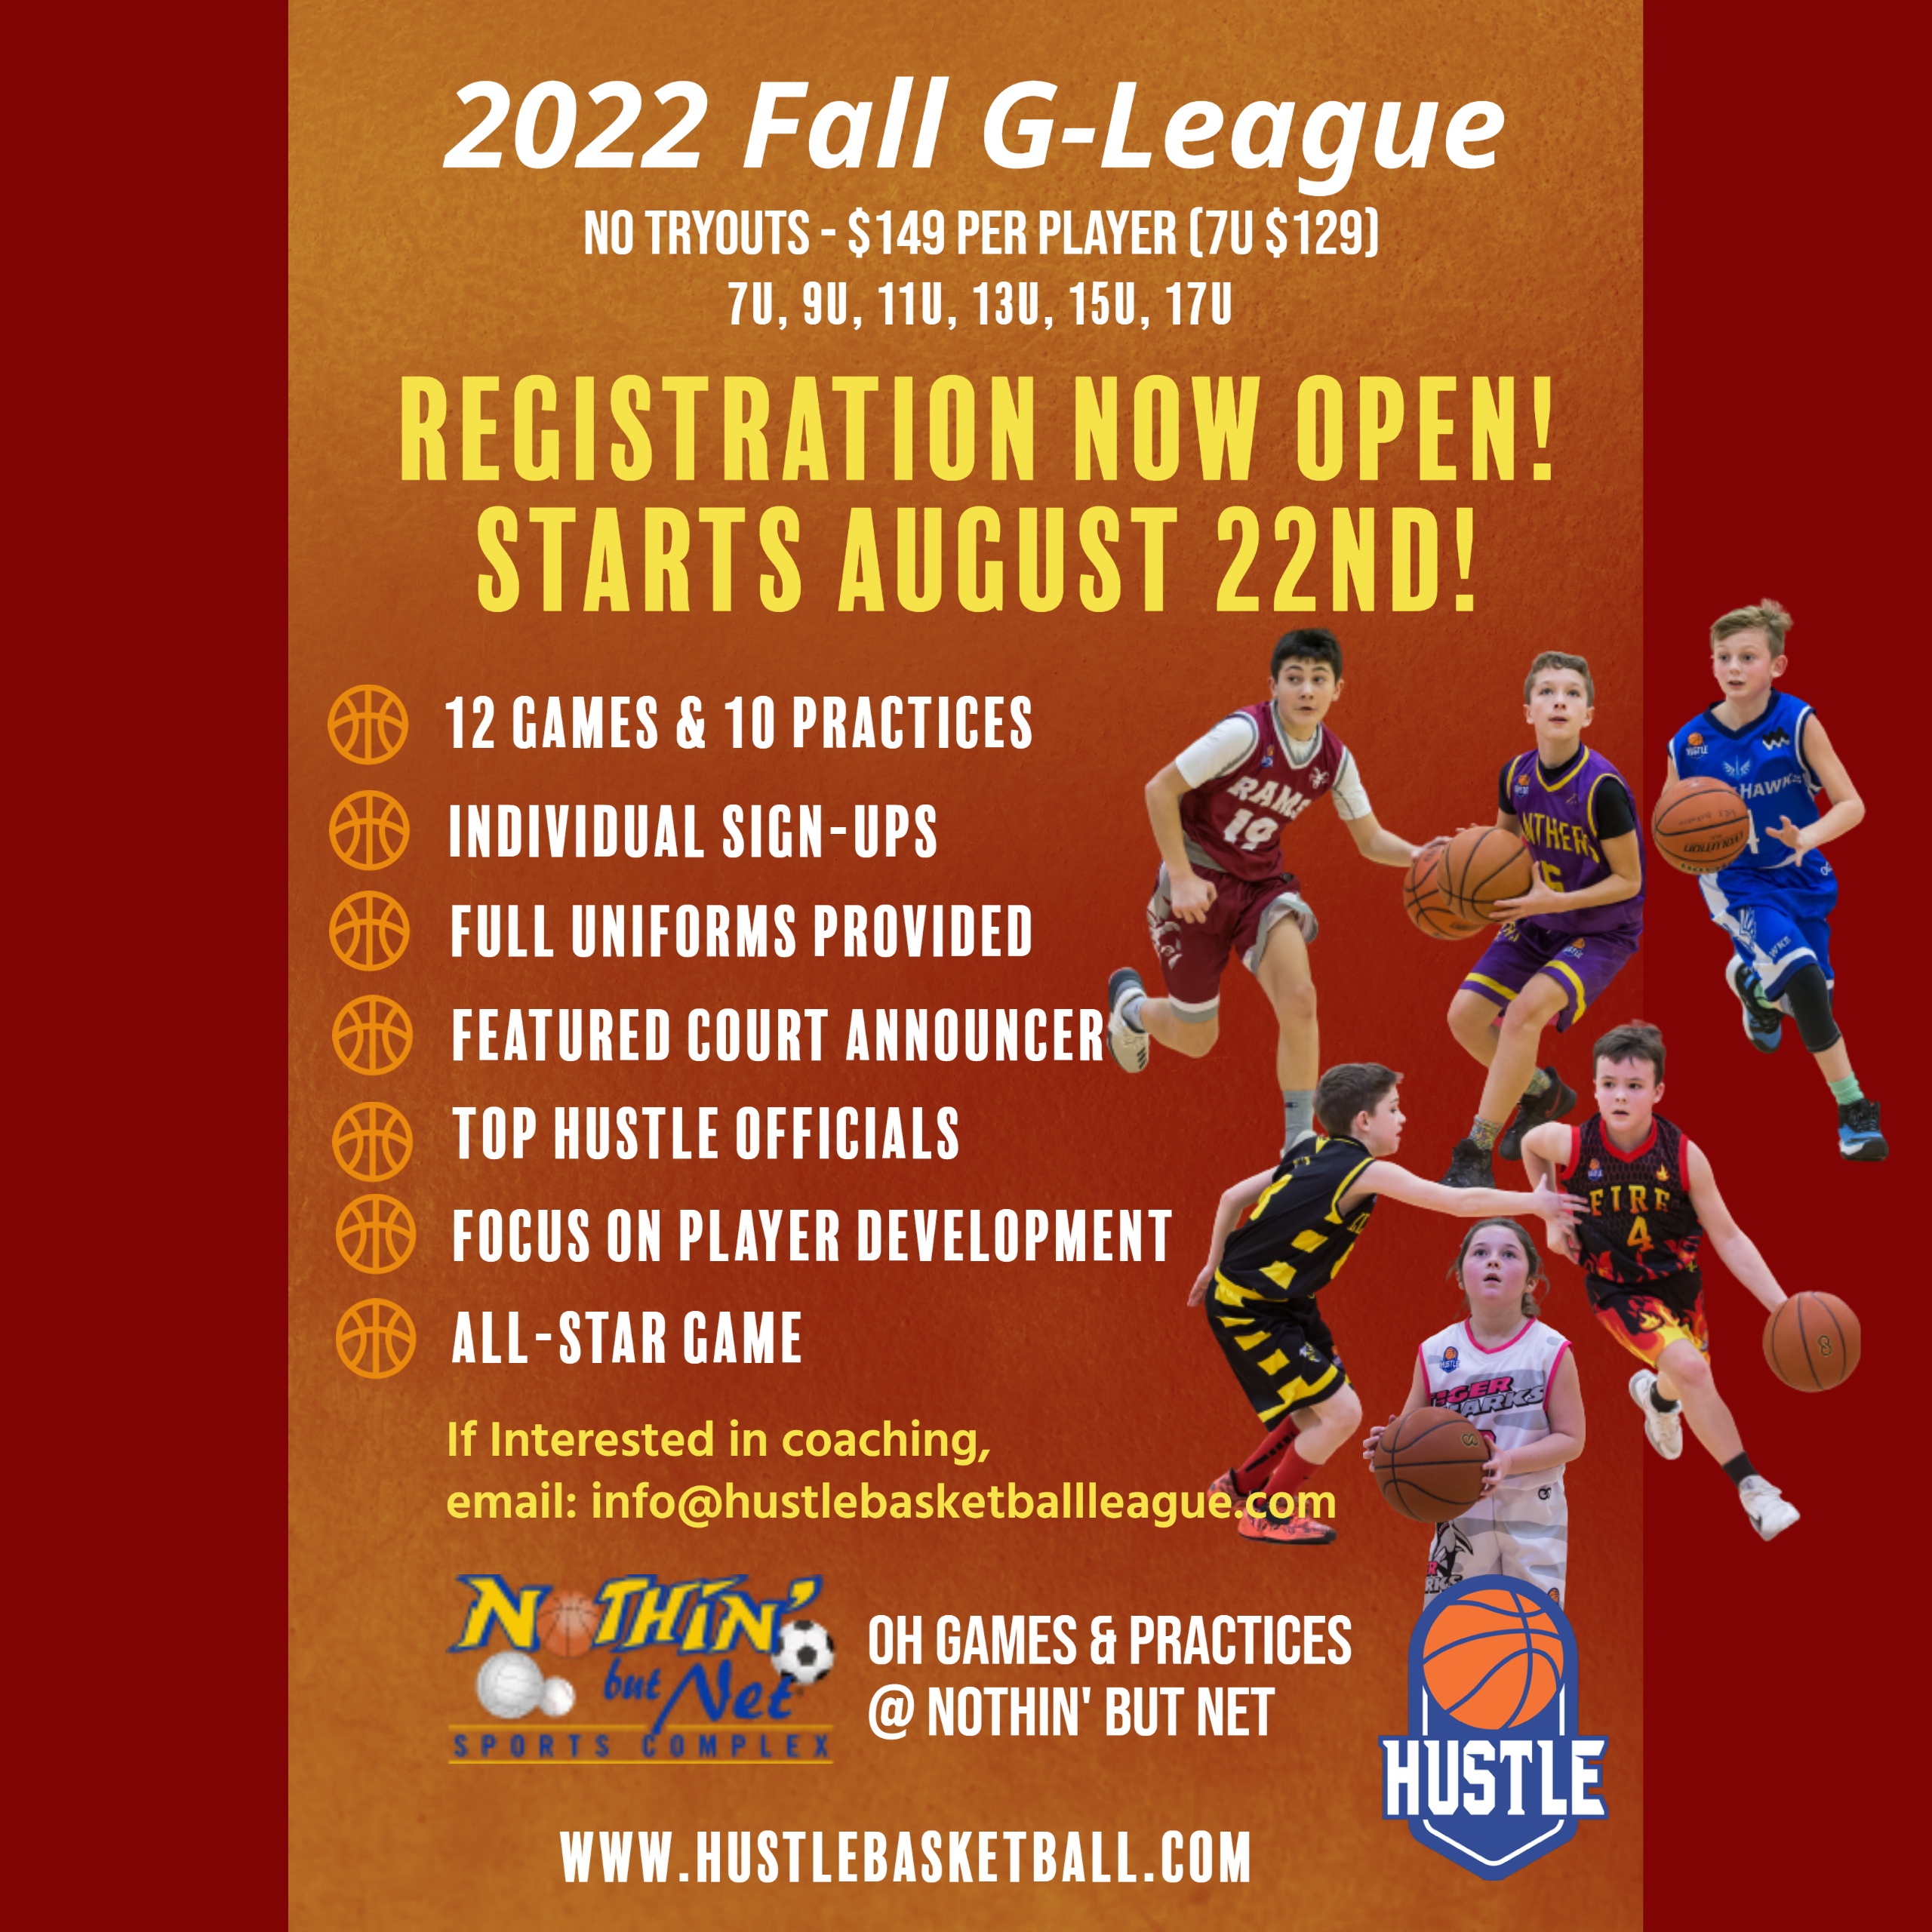 Fall G-League Flyer - 2022 Ohio Only